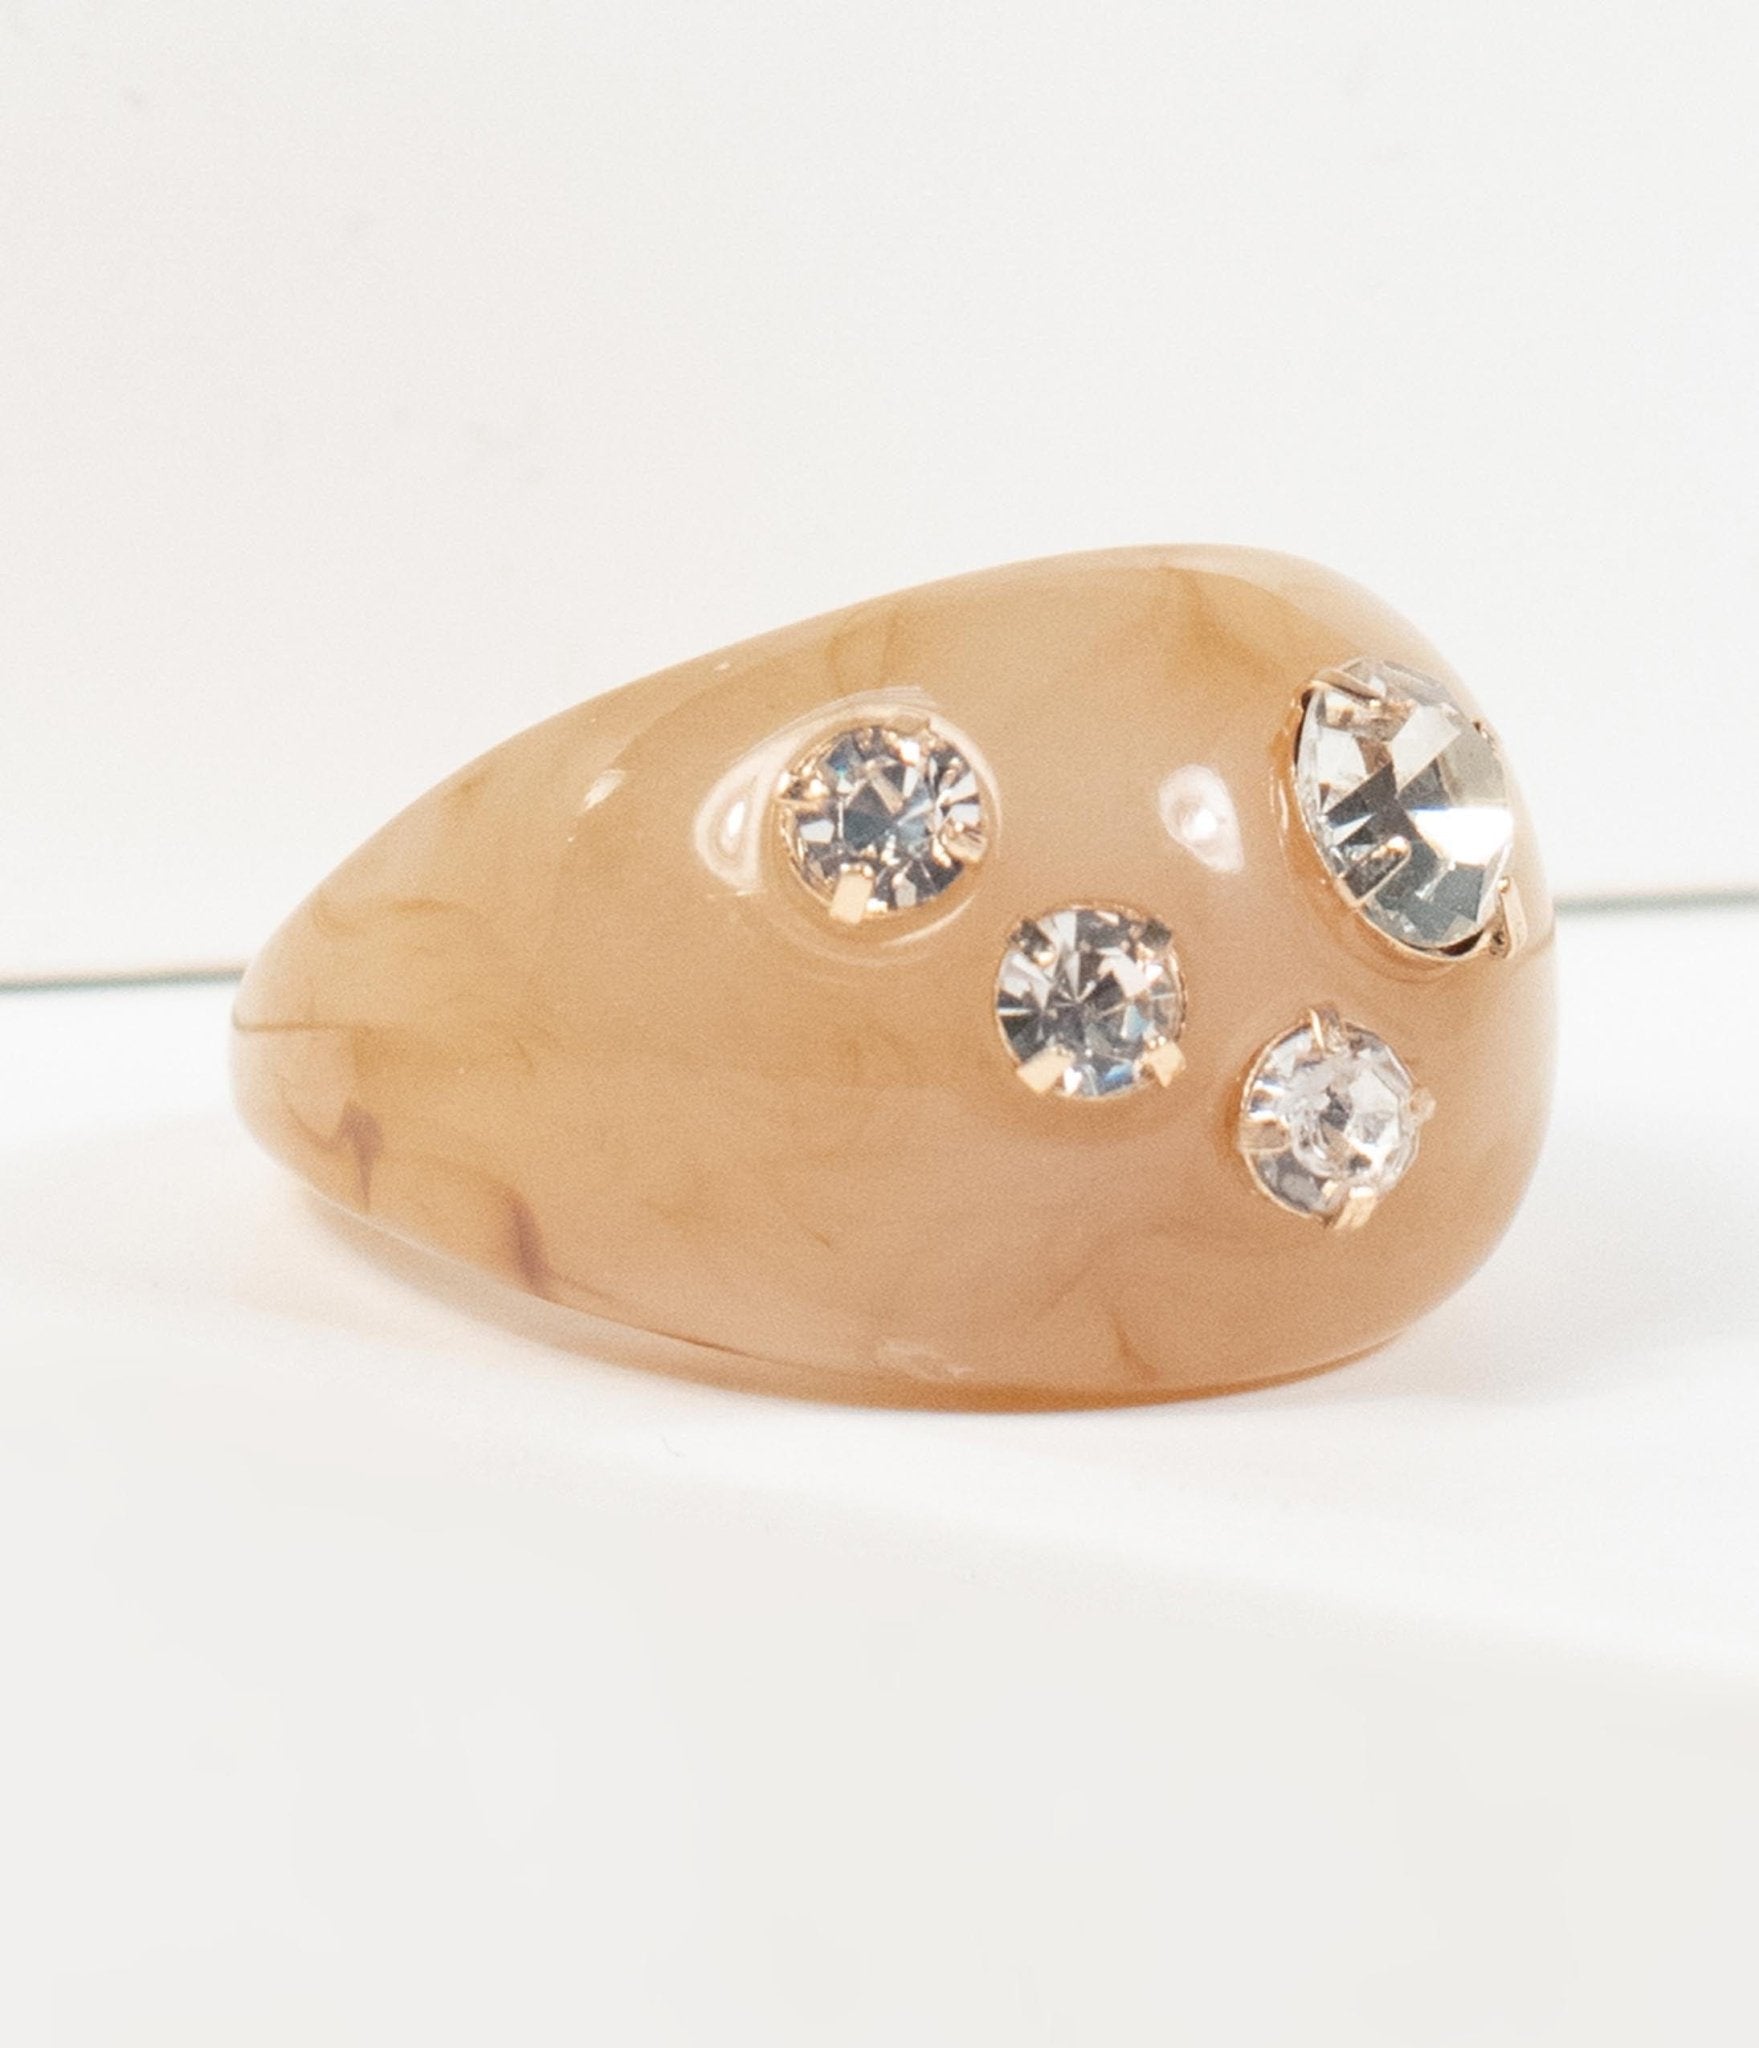 Tan Resin & Rhinestone Ring - Unique Vintage - Womens, ACCESSORIES, JEWELRY